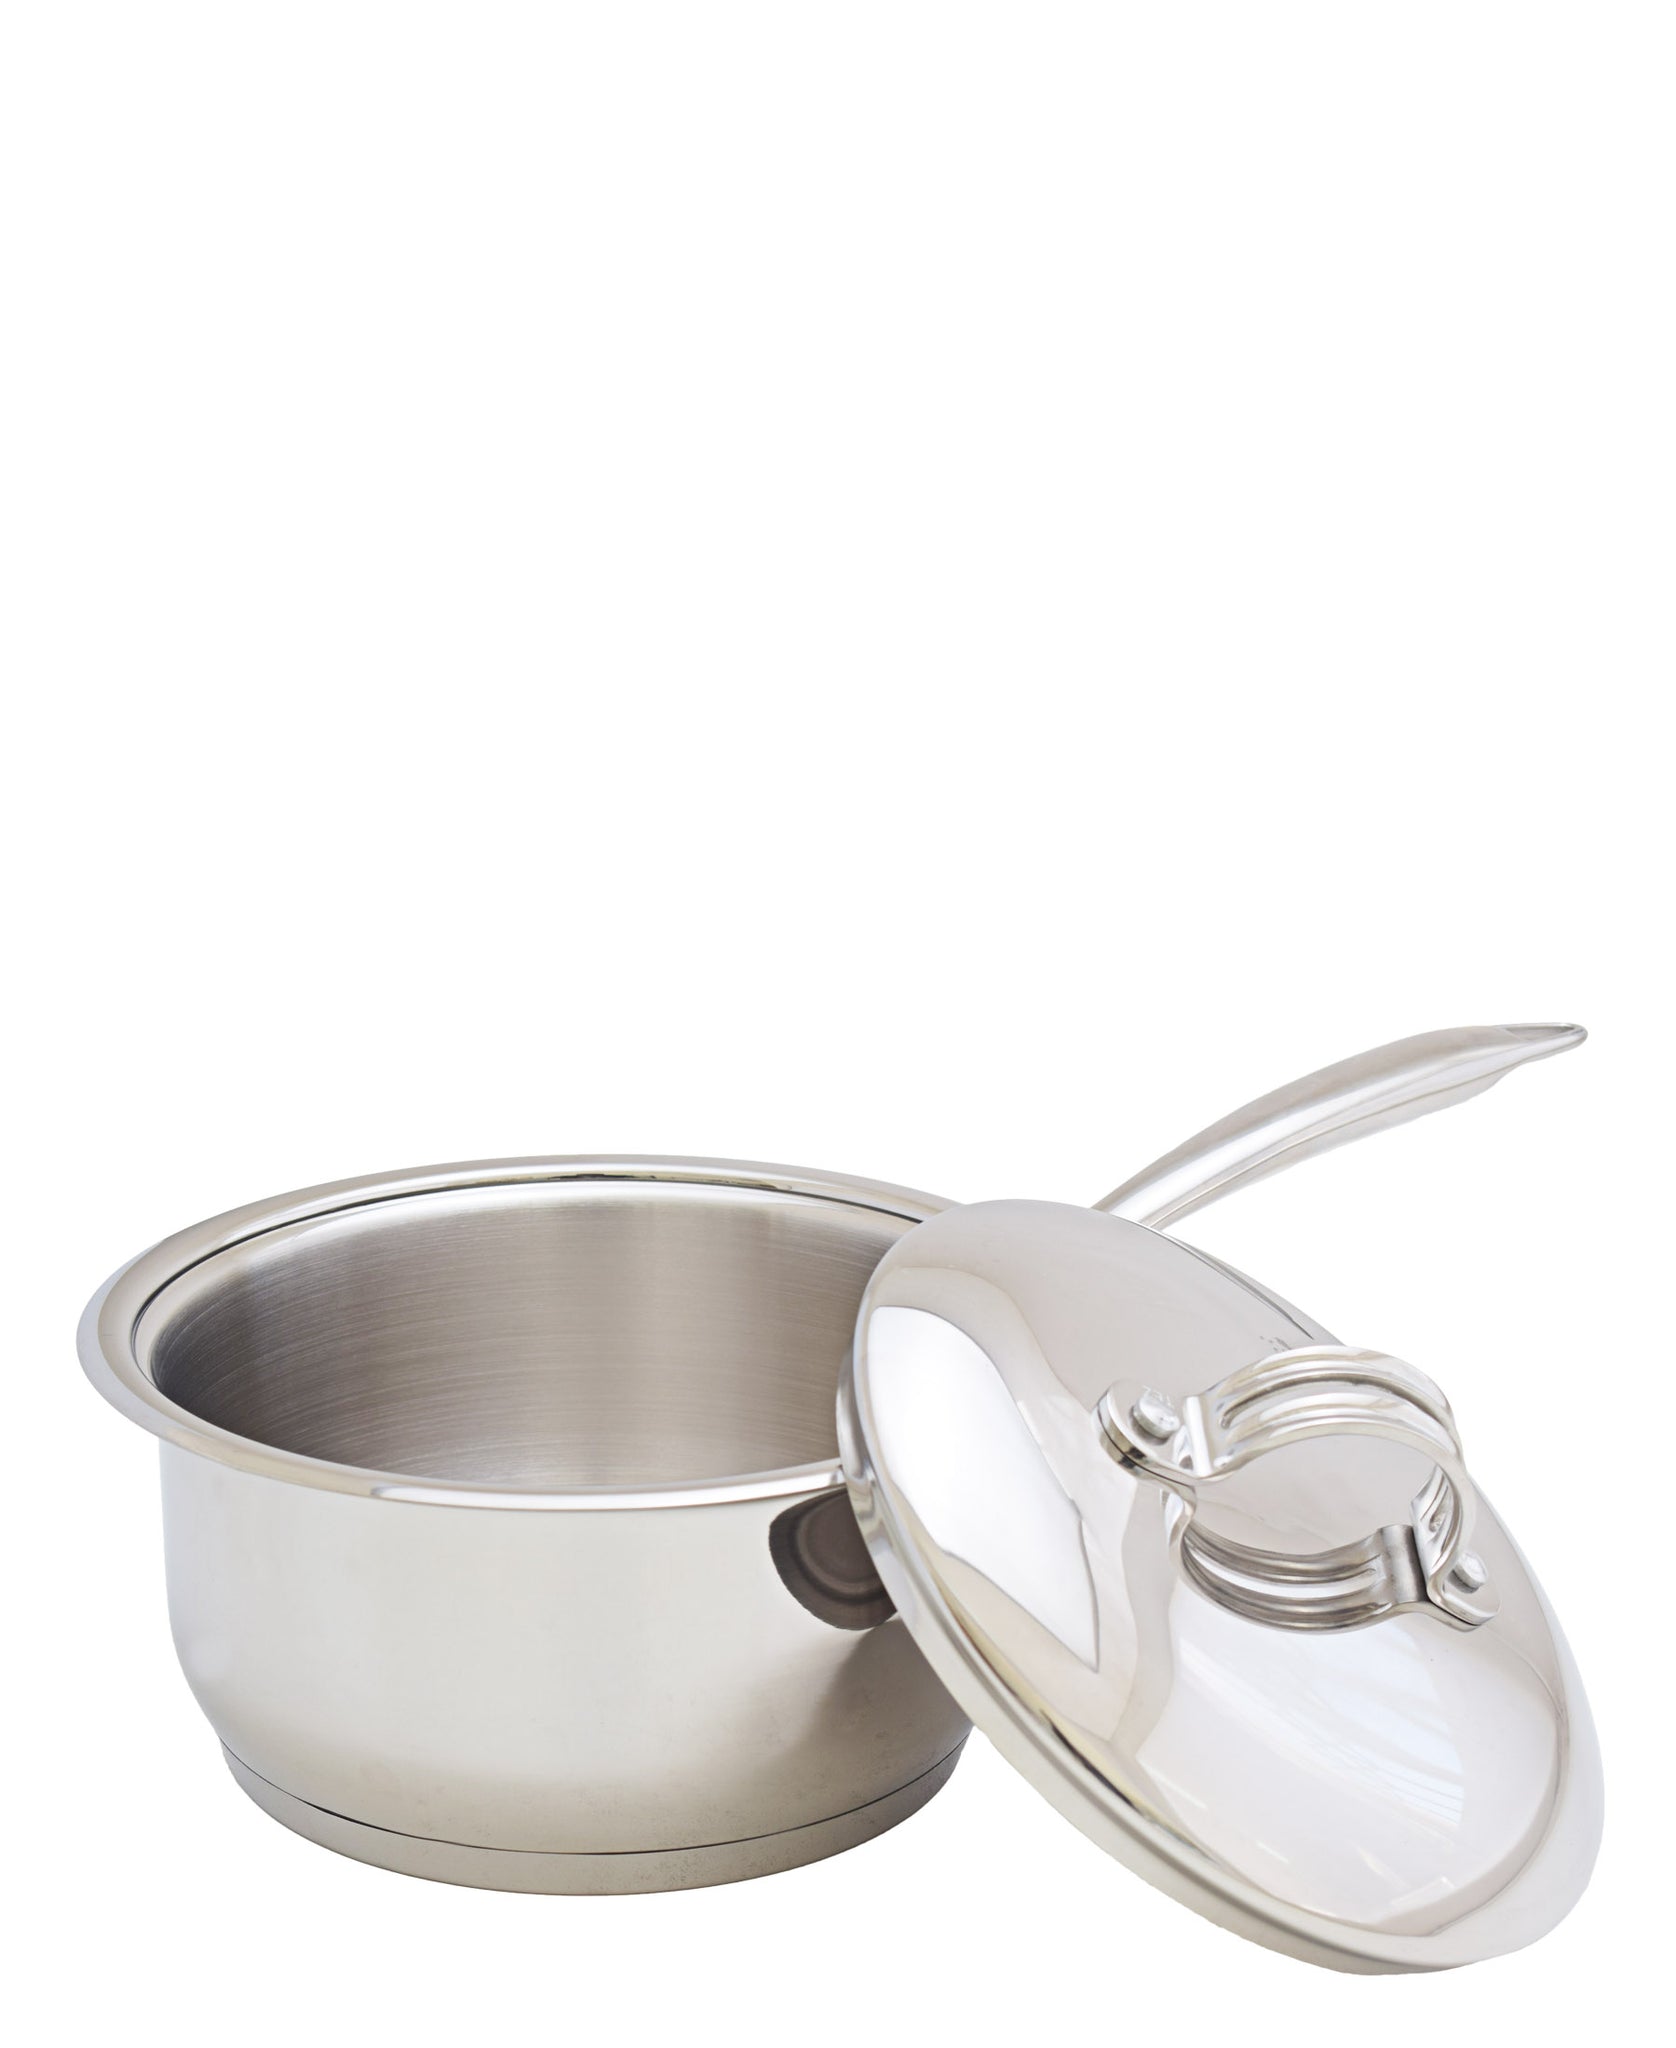 Tez 20cm Sauce Pan With Lid - Silver